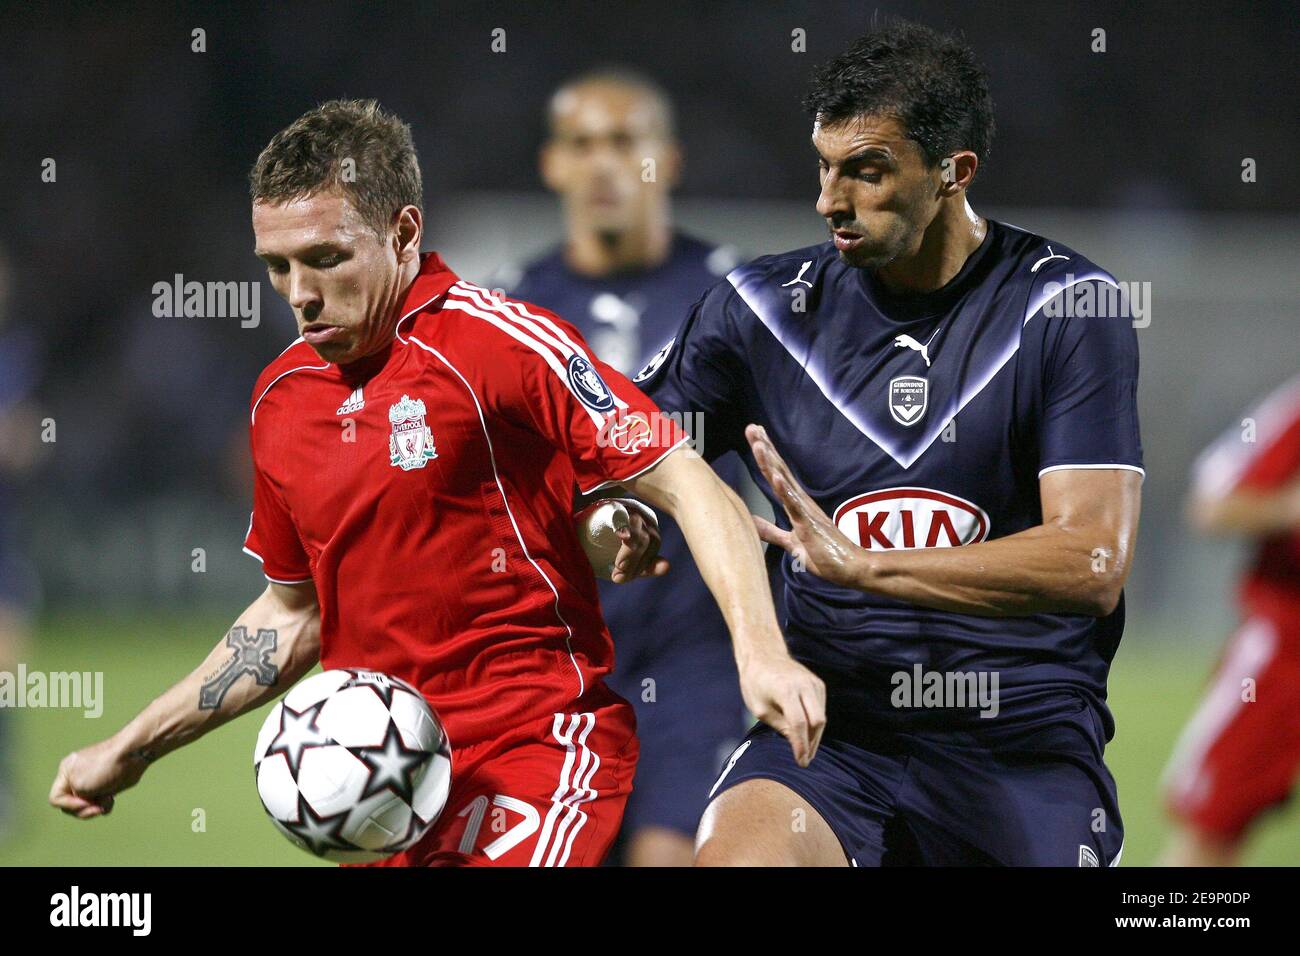 Liverpool's Craig Bellamy controls the ball during the UEFA Champions League, Group C, Girondins de Bordeaux vs Liverpool FC at the Stade Chaban-Delmas in Bordeaux, France on October 18, 2006. Liverpool won 1-0. Photo by Christian Liewig/ABACAPRESS.COM Stock Photo